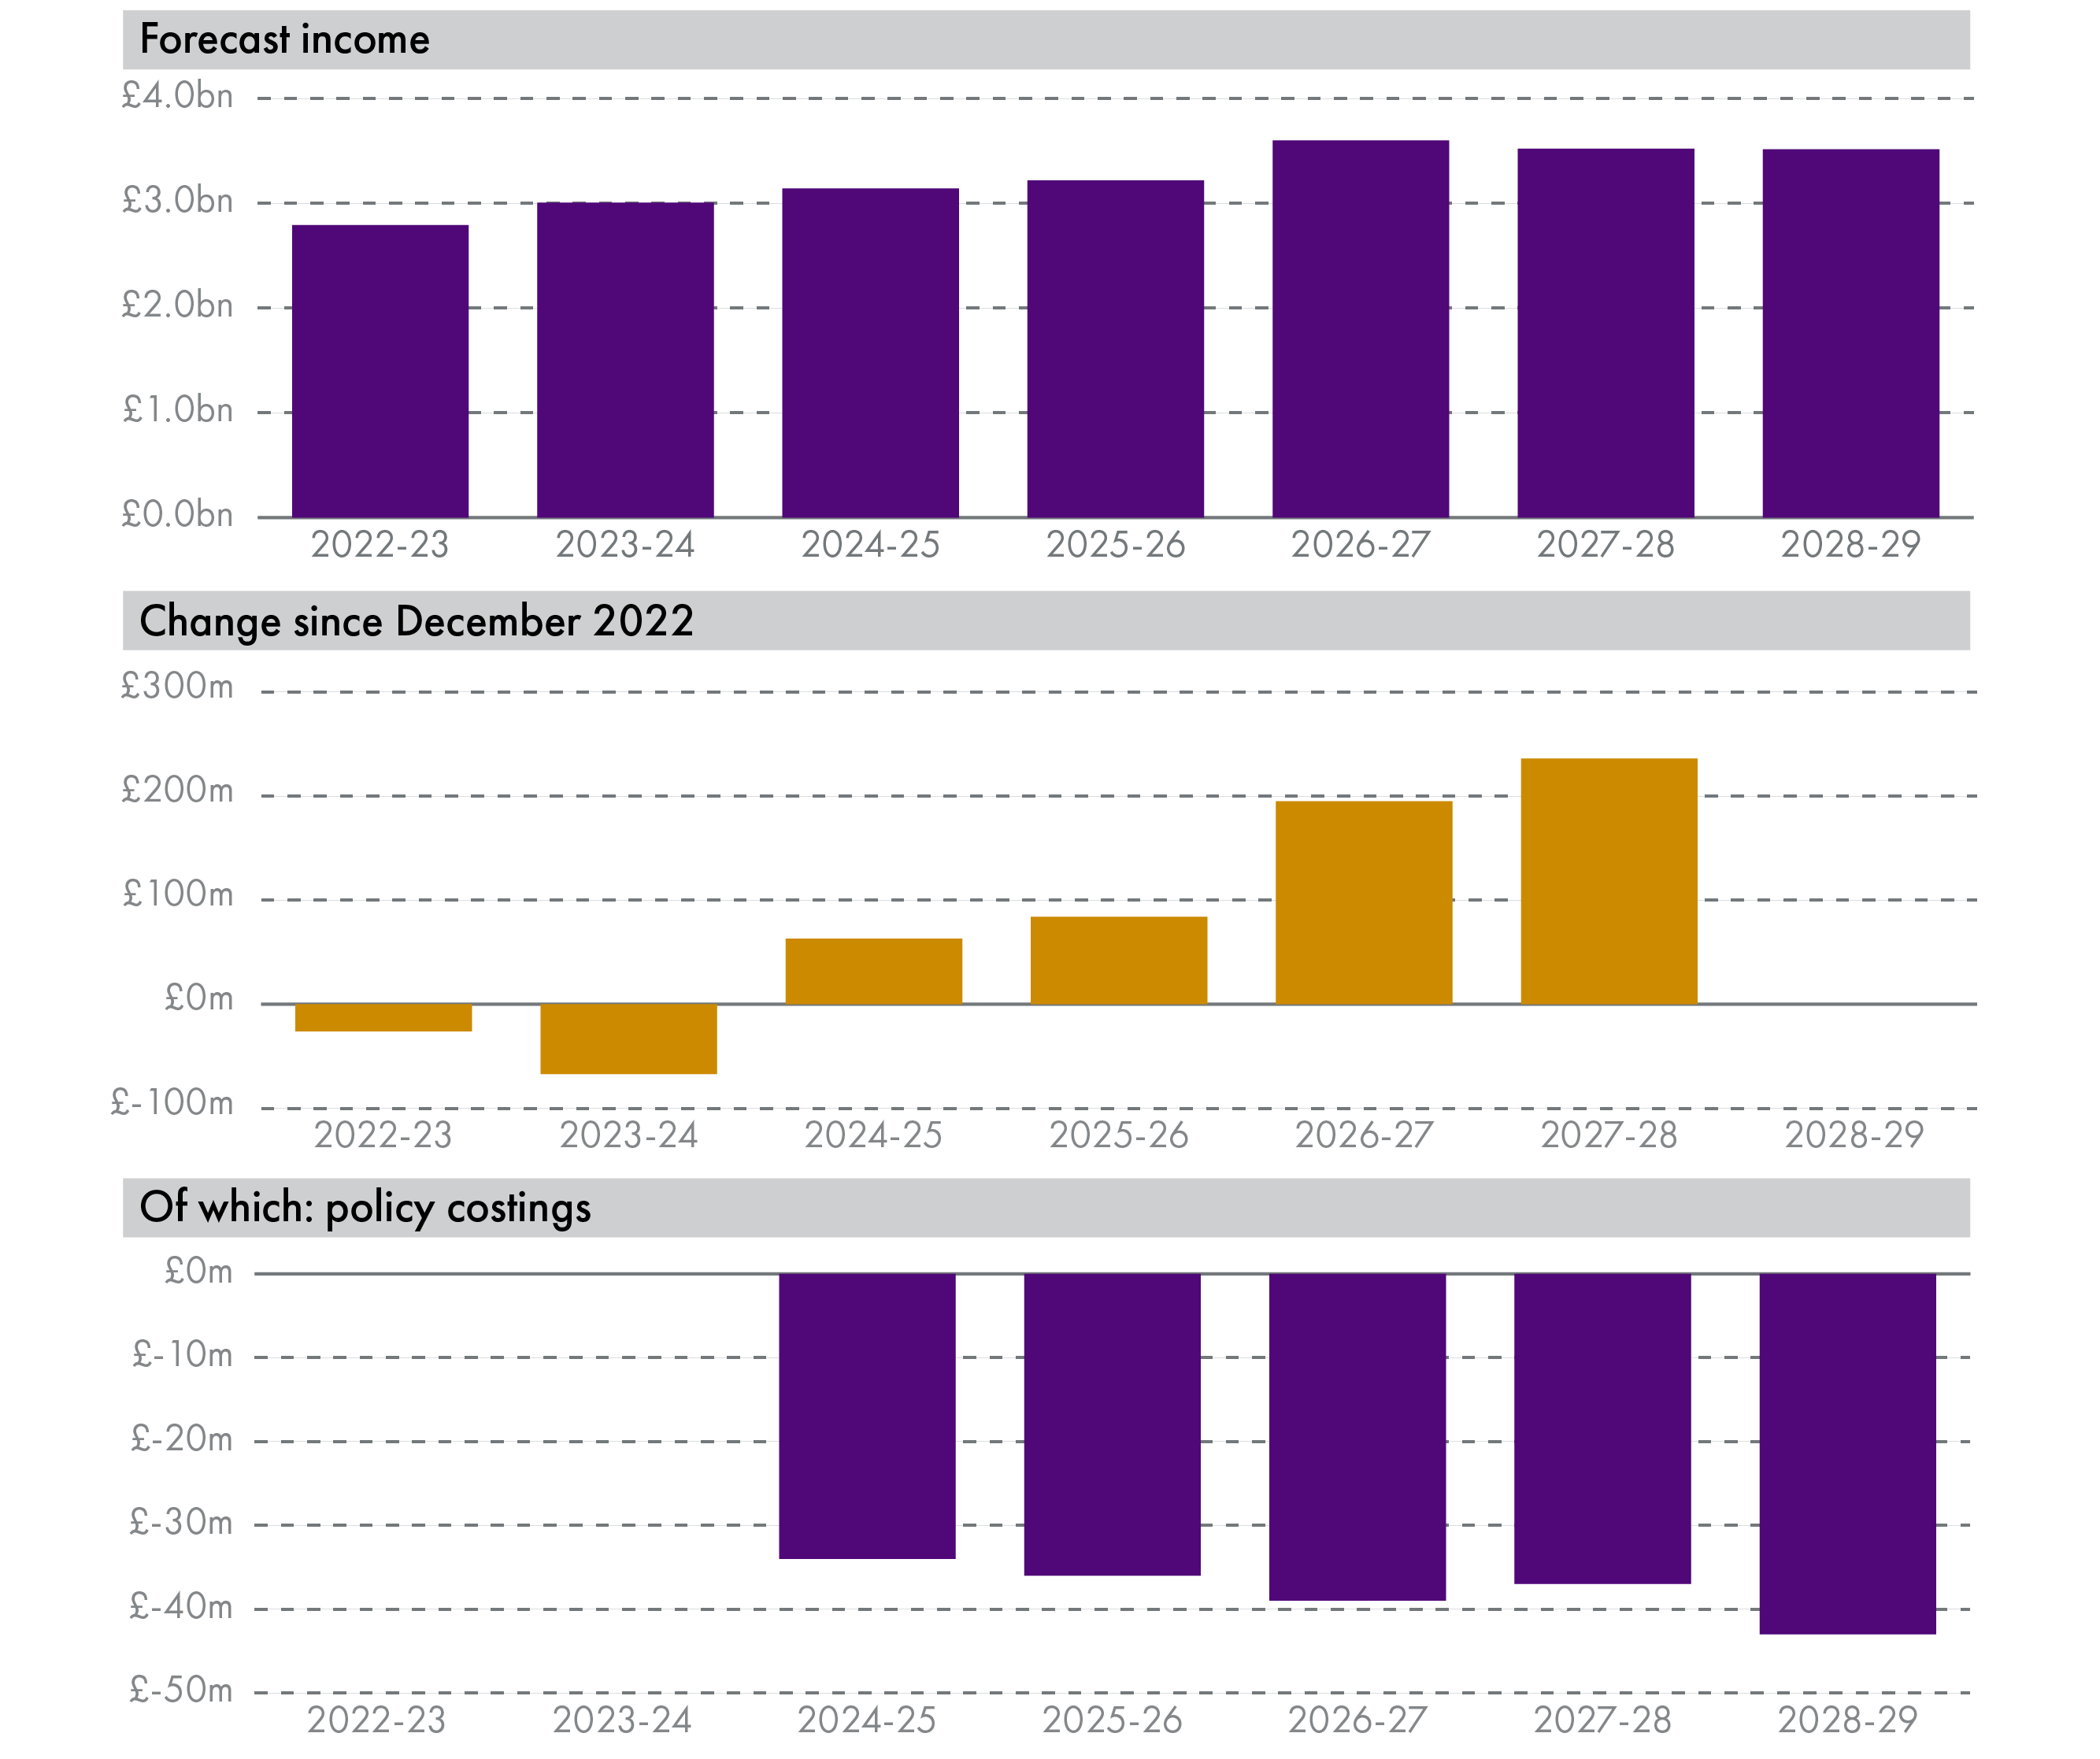 The Scottish Fiscal Commission forecast that income from non-domestic rates will increase over the next few years to reach around £3.5 billion by 2026-27. Since the December 2022 forecast, income in 2024-25 and onwards is expected to be higher in each year. New relief announcements in the 2024-25 Budget decrease income by around £30 to £40 million per year from 2024-25 onwards.